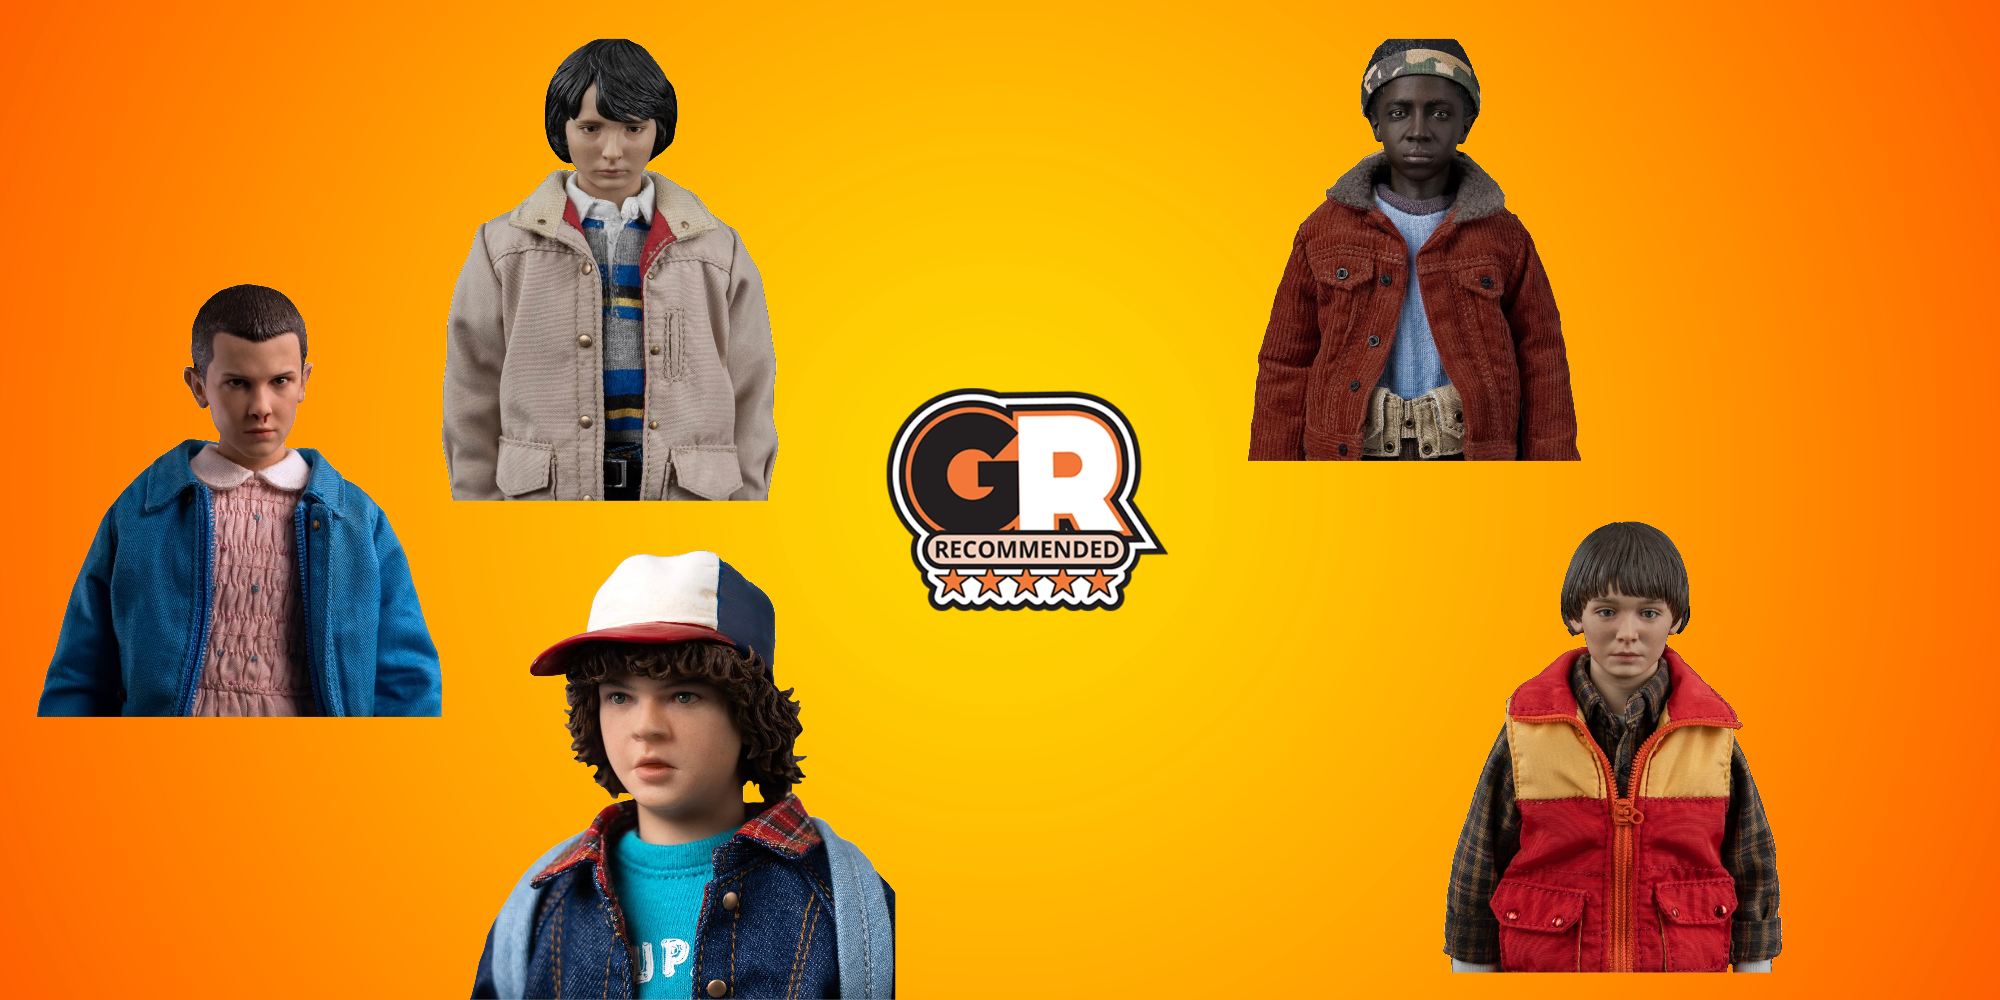 Stranger Things Action Figures